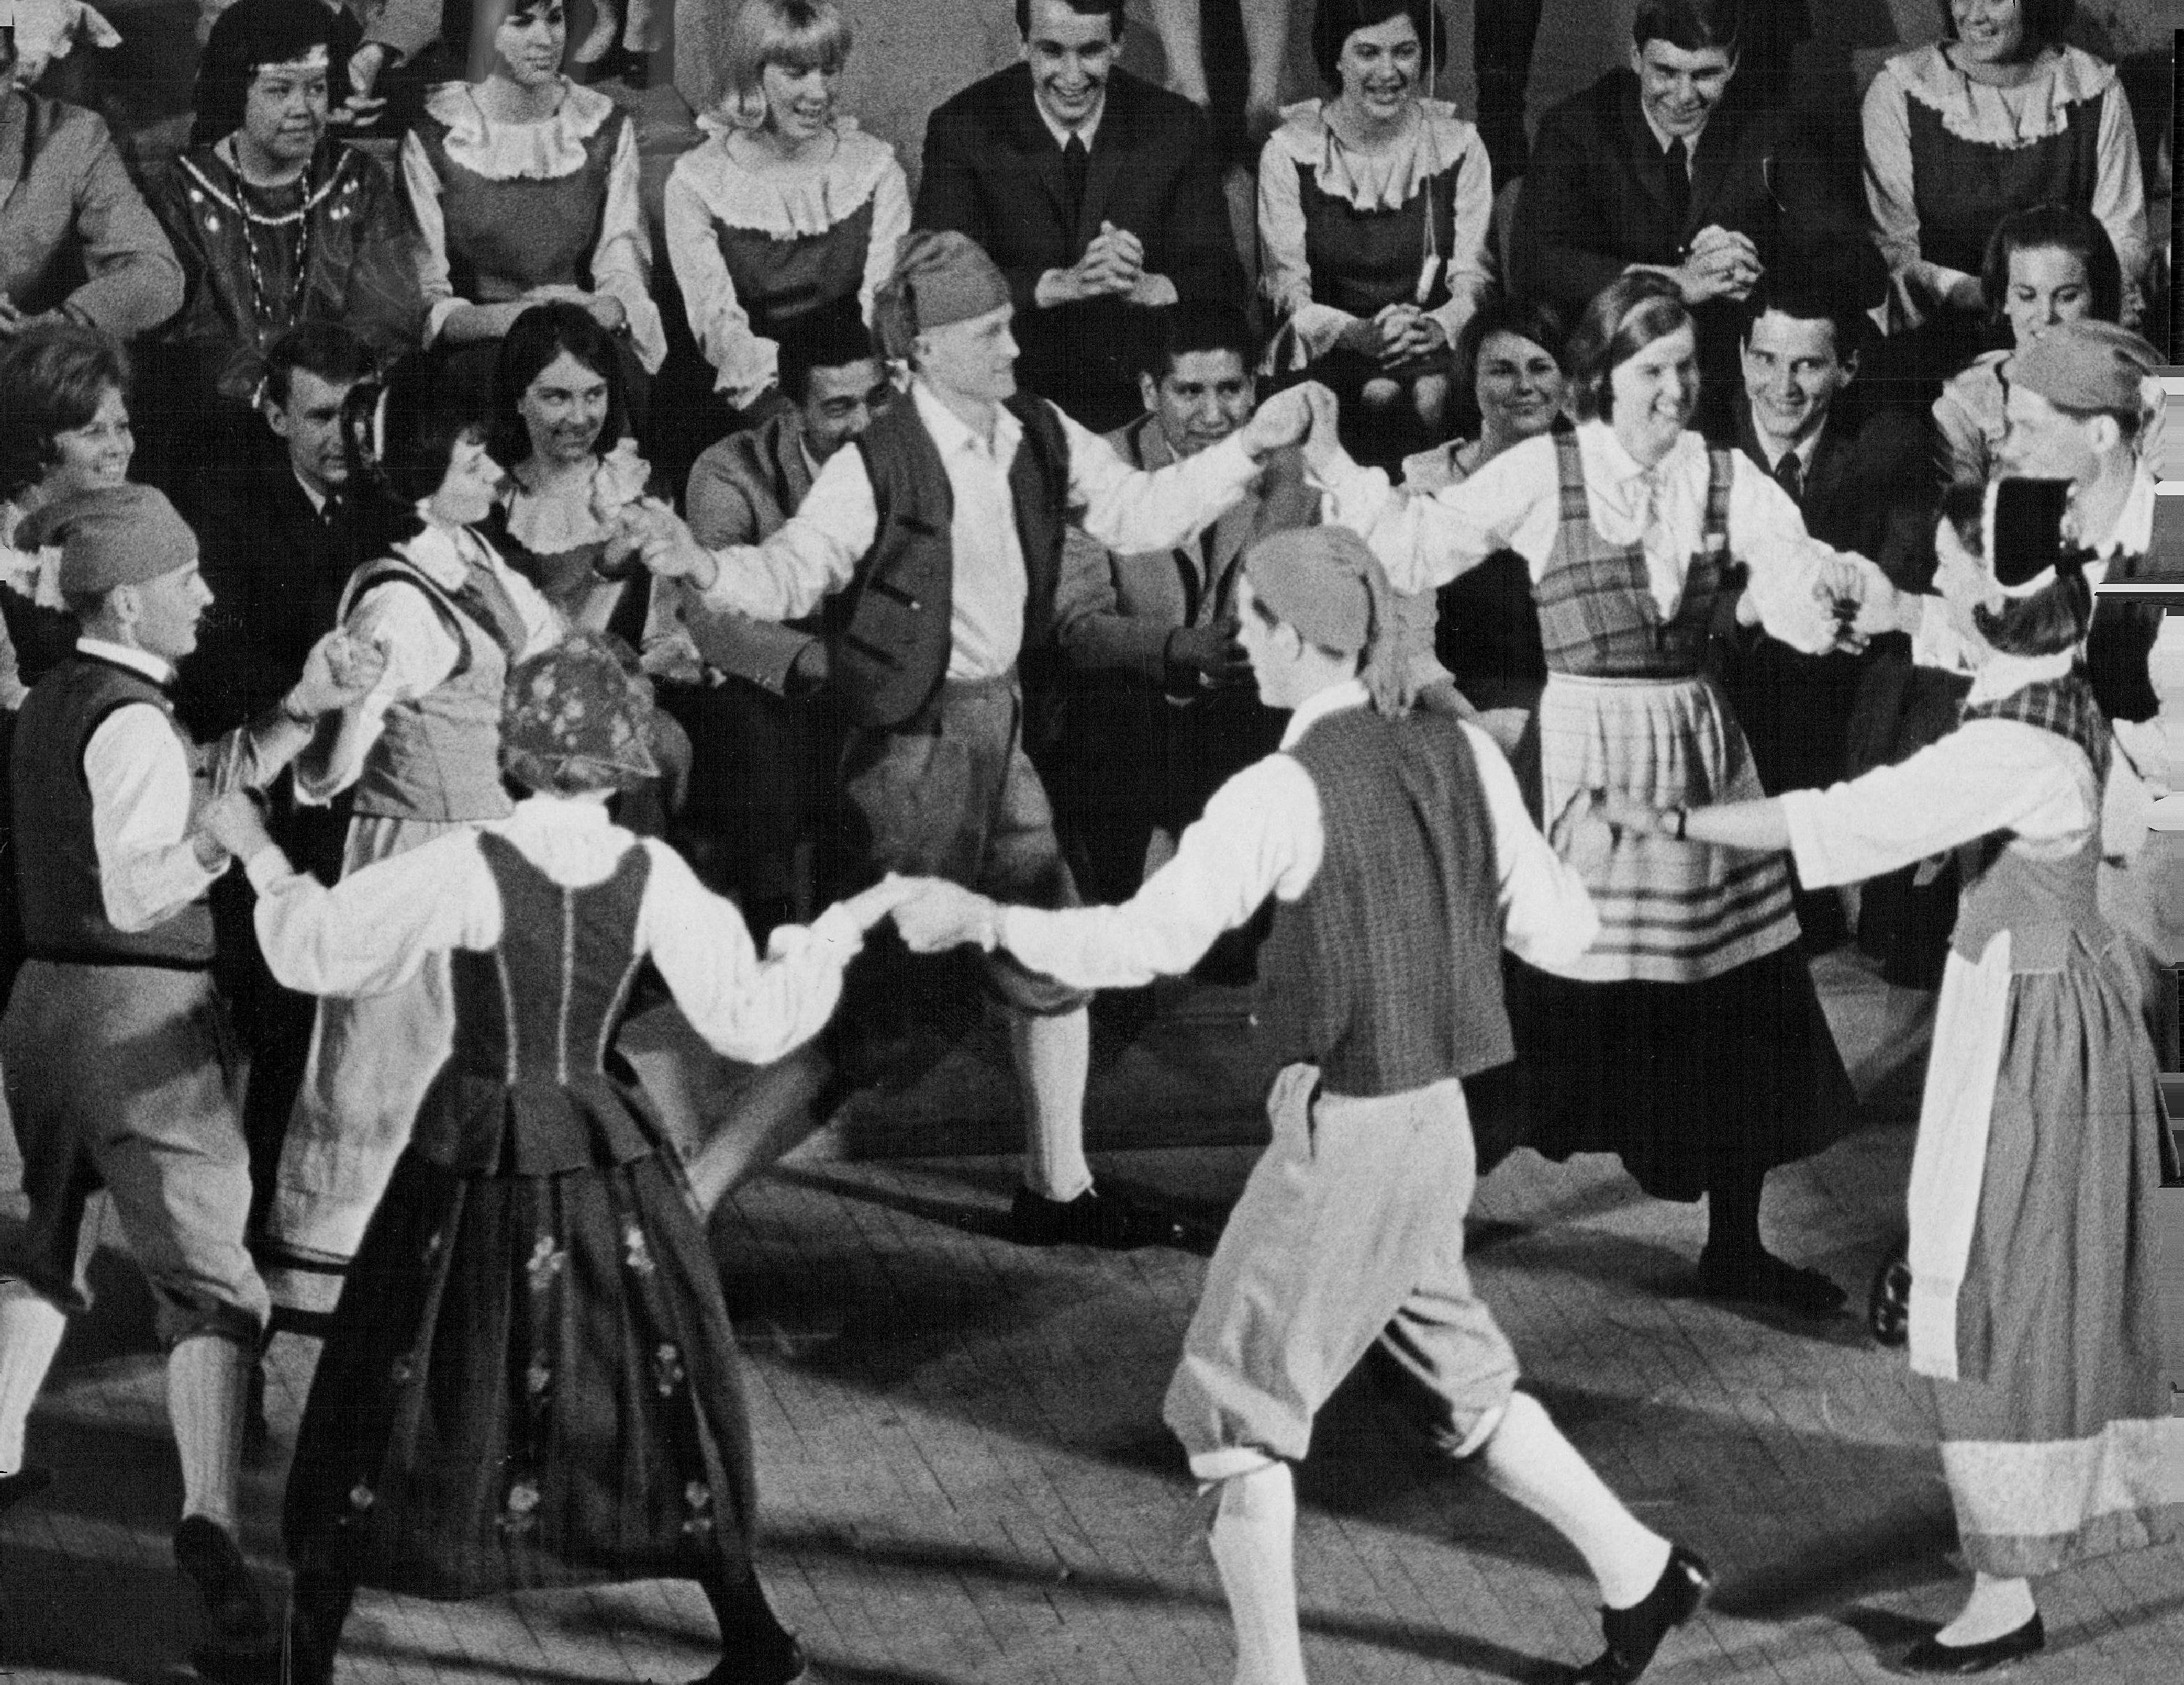 The Dancing Scandinavians are a part of "Sing-Out 65" as The Moral Re-Armament group continues its tour with the University of Colorado performance on November 17-18, 1965 | Source: Getty Images